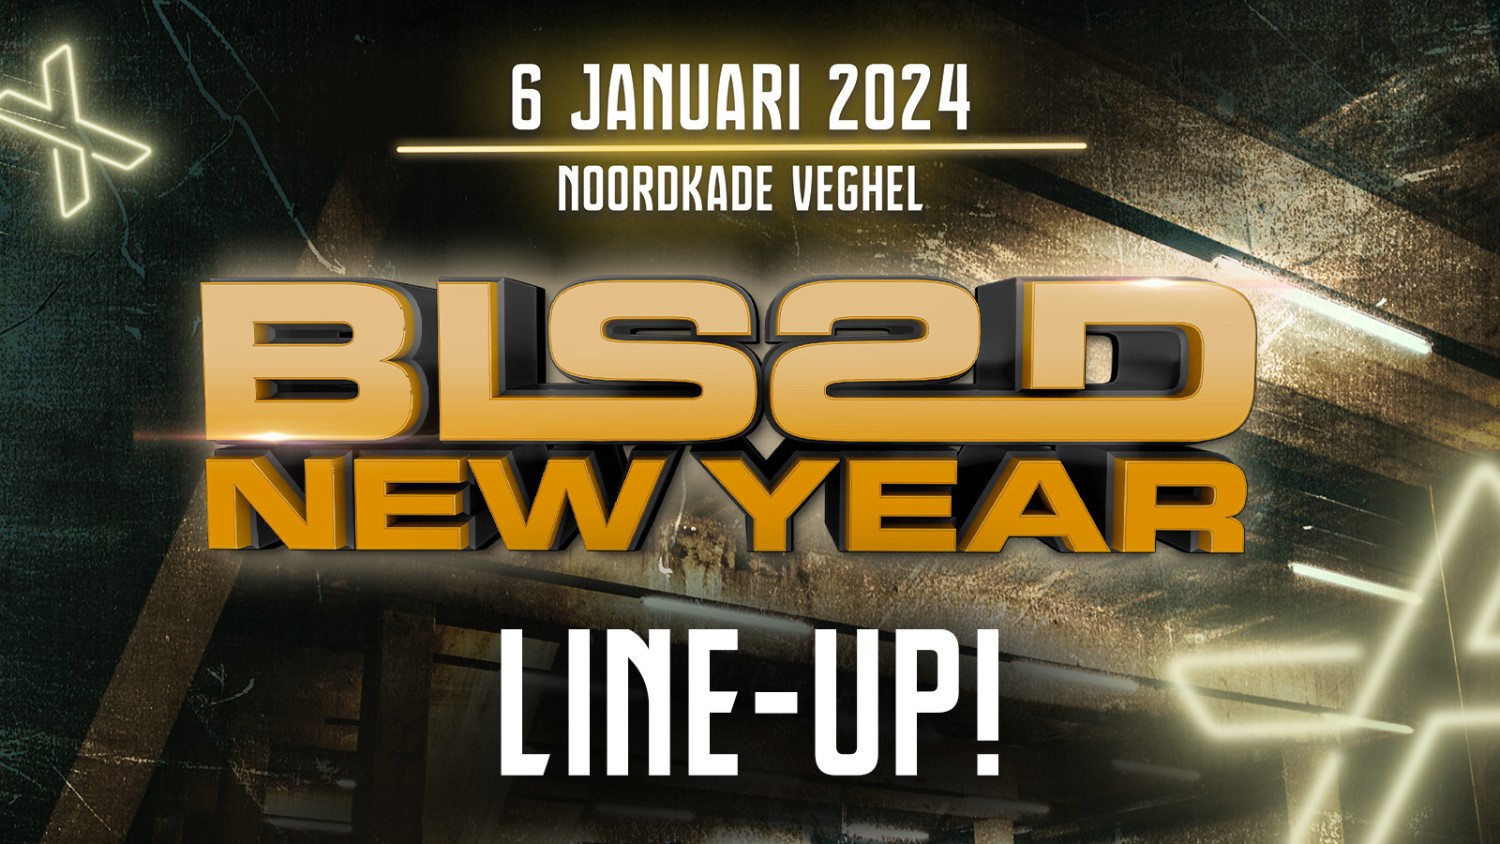 Party nieuws: Line-up BLSSD New Year 2024 bekend